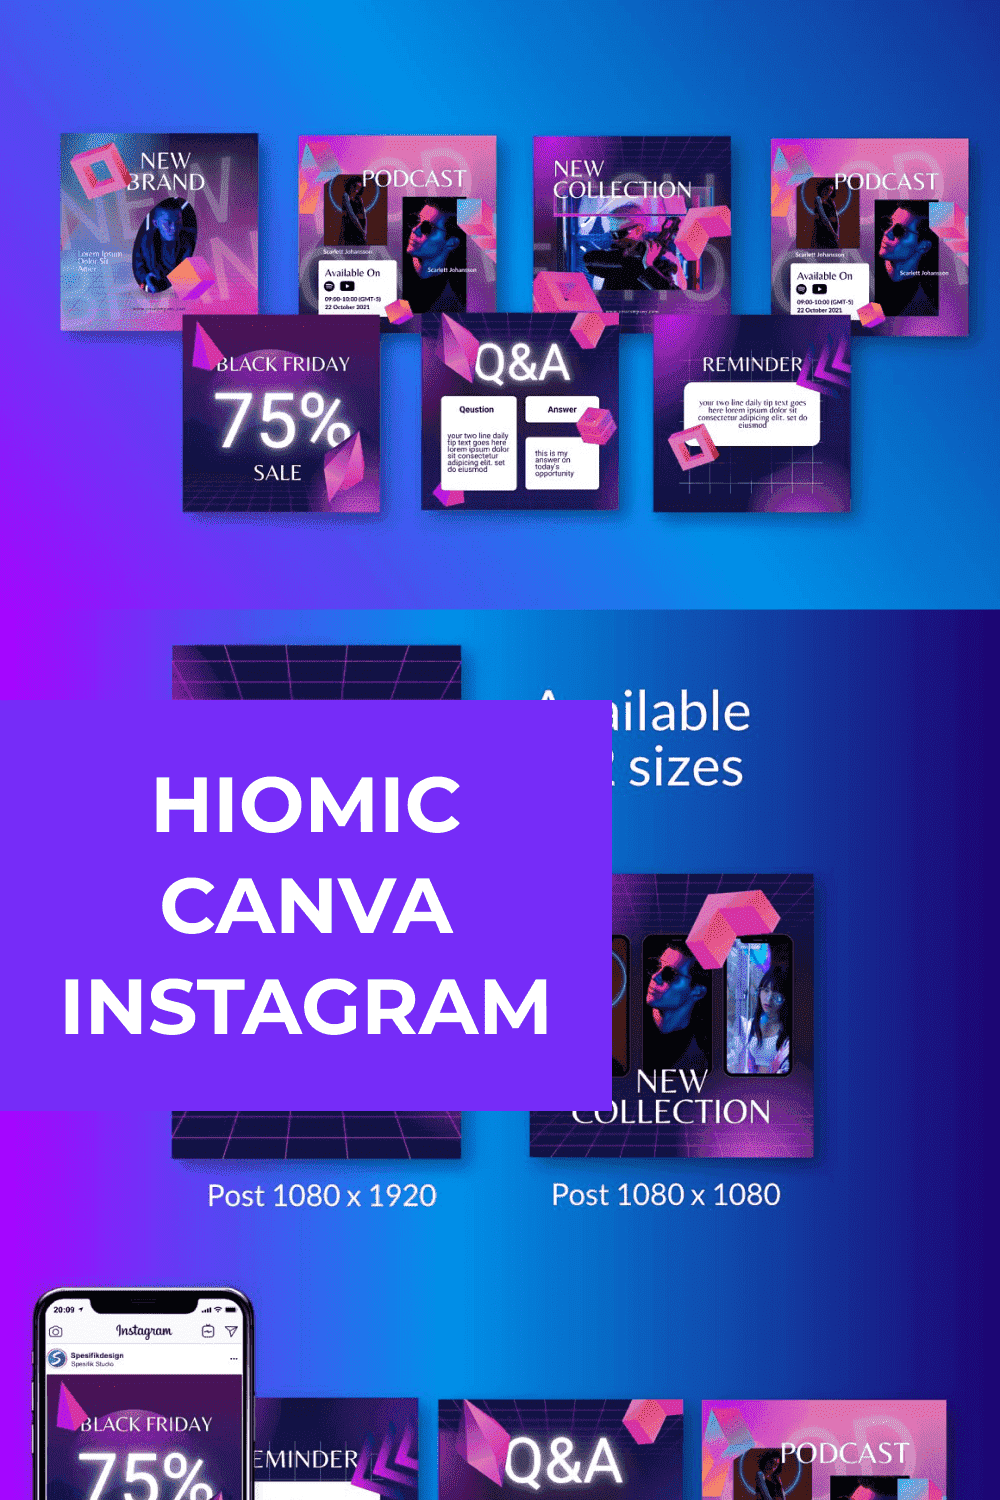 Hiomic Canva Instagram Preview.